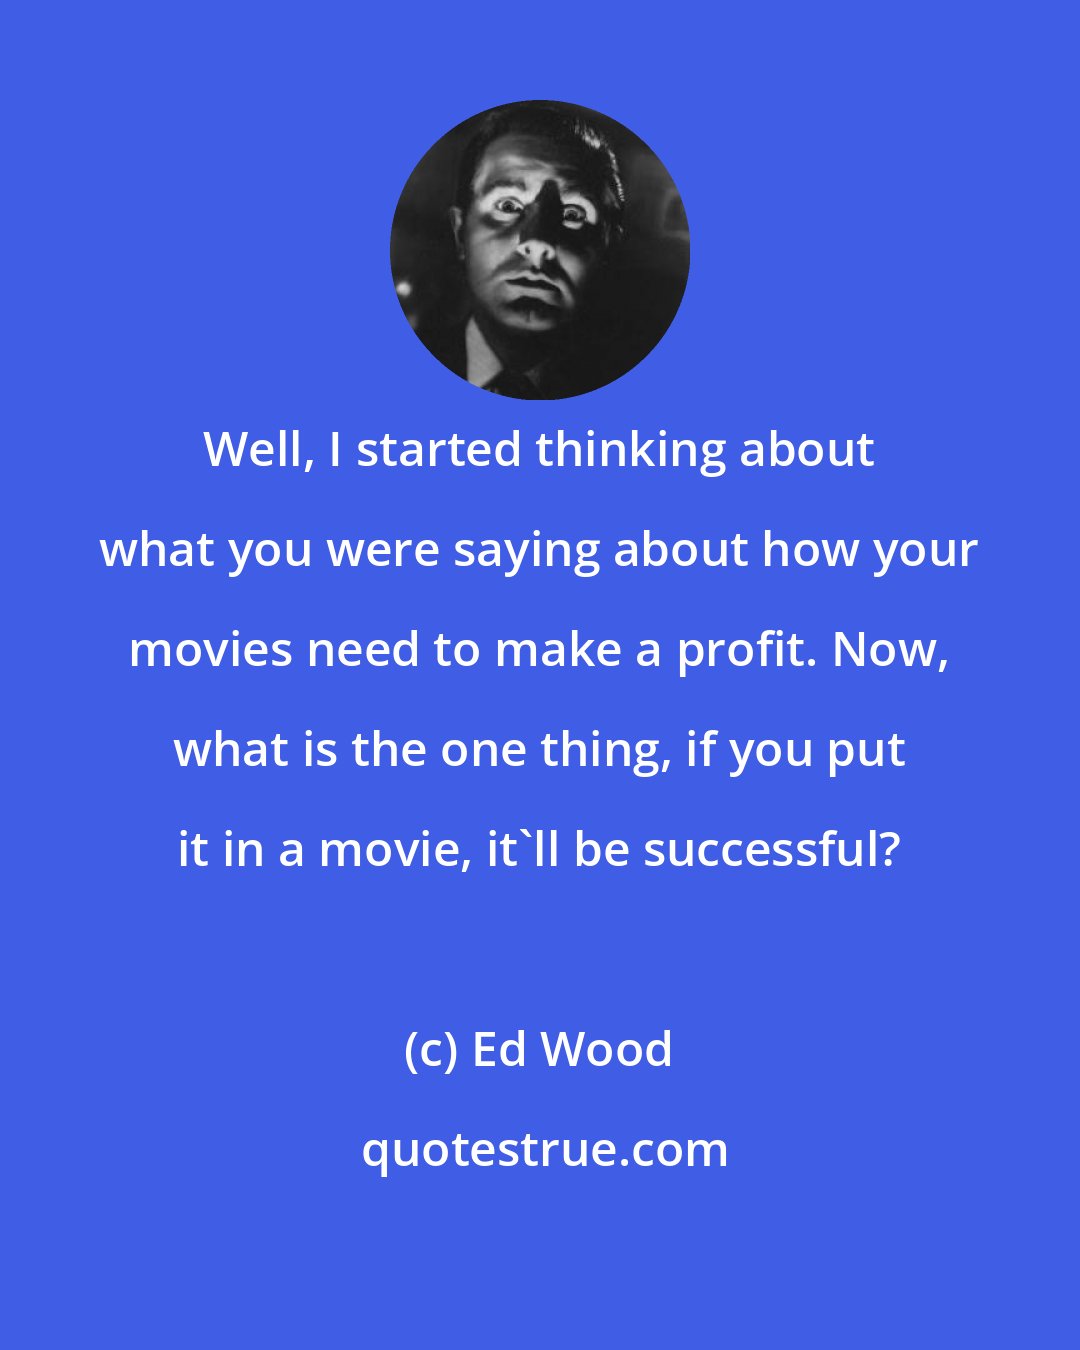 Ed Wood: Well, I started thinking about what you were saying about how your movies need to make a profit. Now, what is the one thing, if you put it in a movie, it'll be successful?